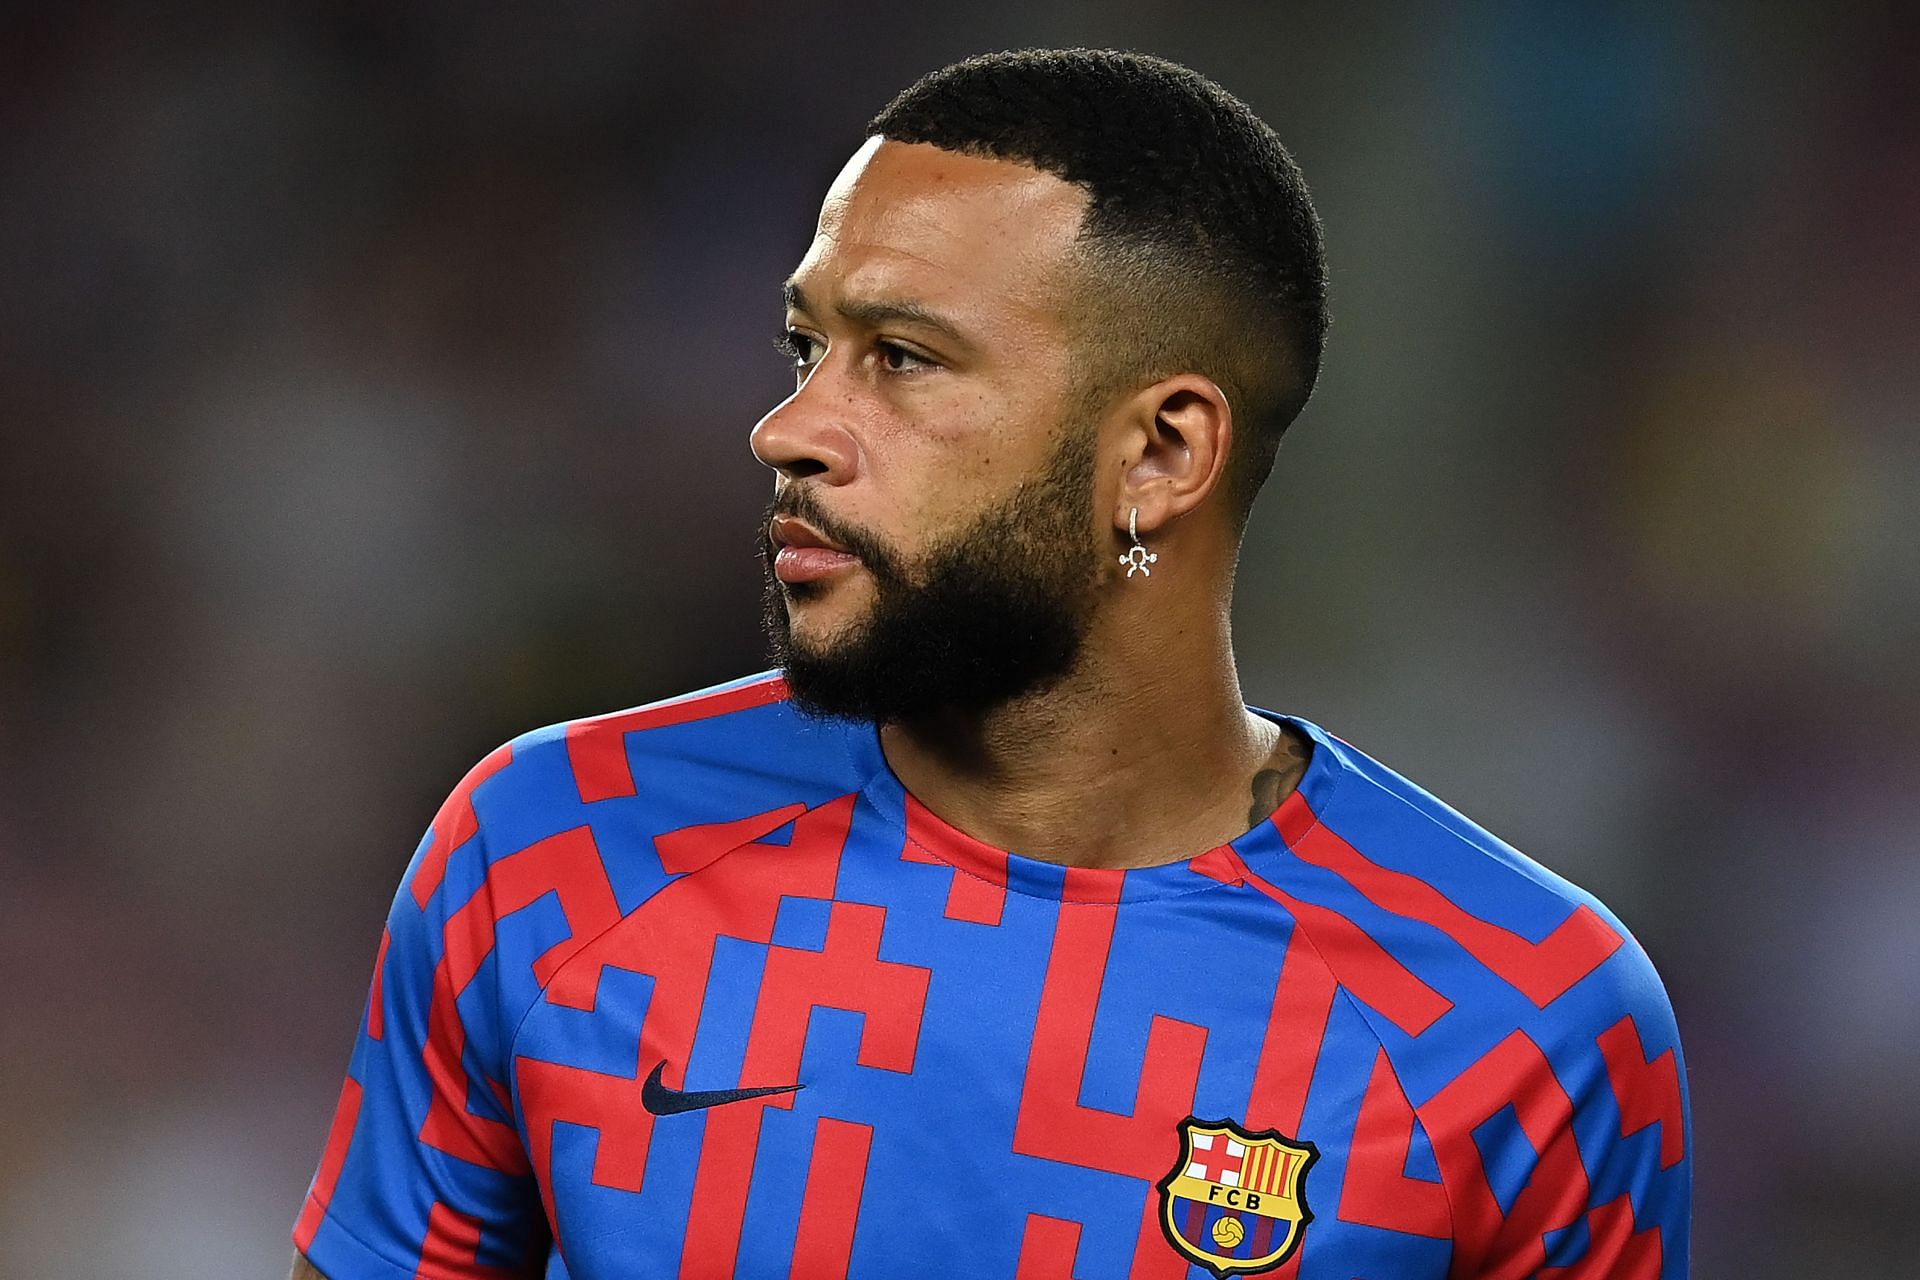 Depay is going through a difficult period at Barcelona amid the lack of opportunities.